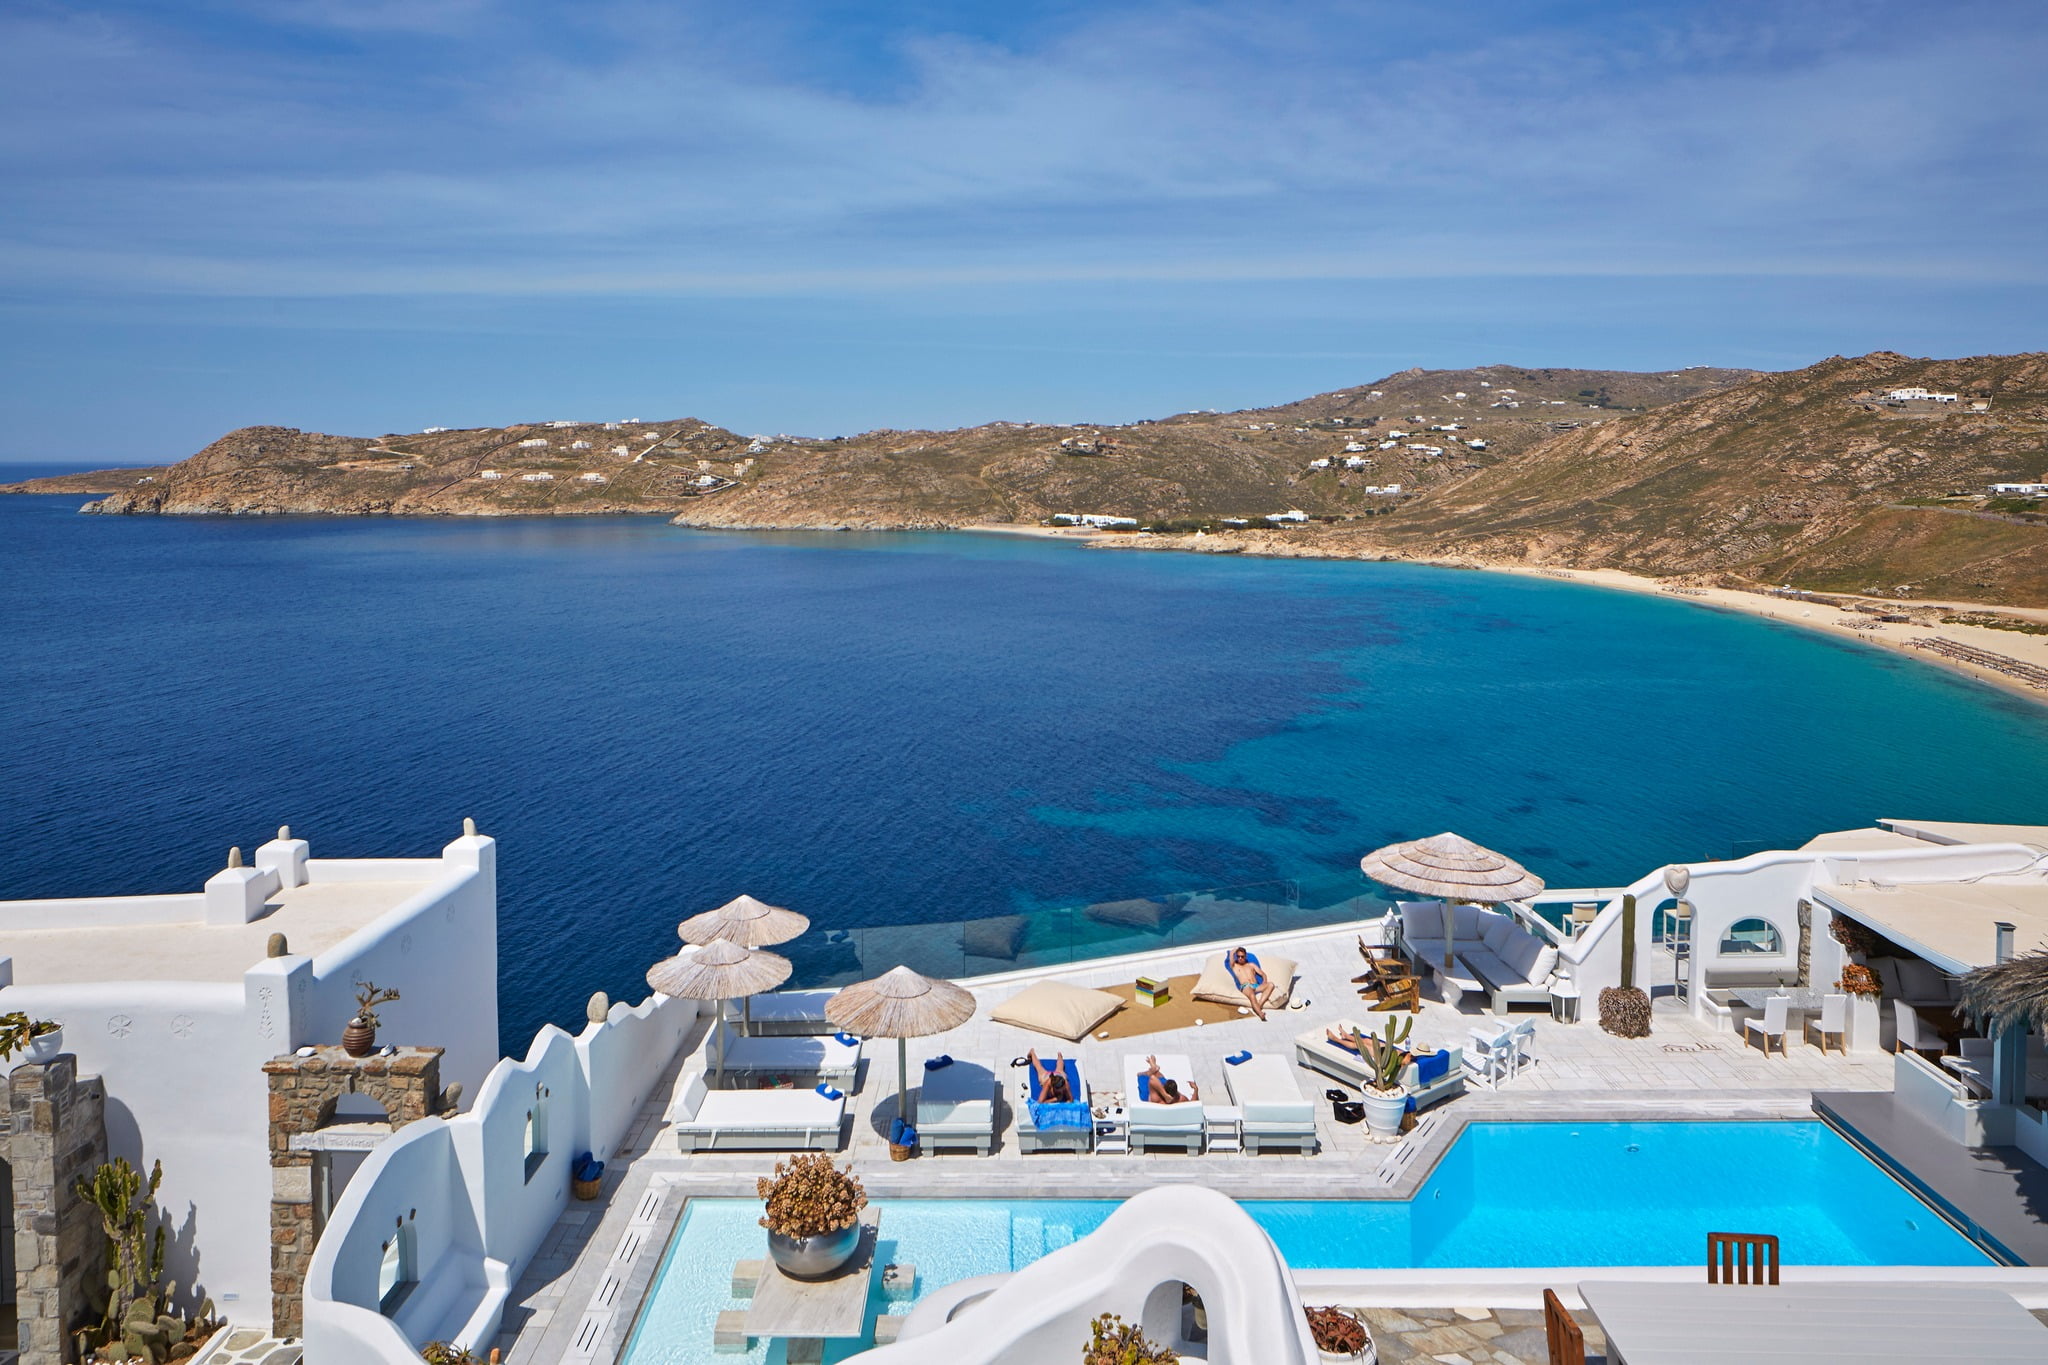 Pool stretches towards the Aegean Sea, lined with comfy sun loungers under sunshades. 